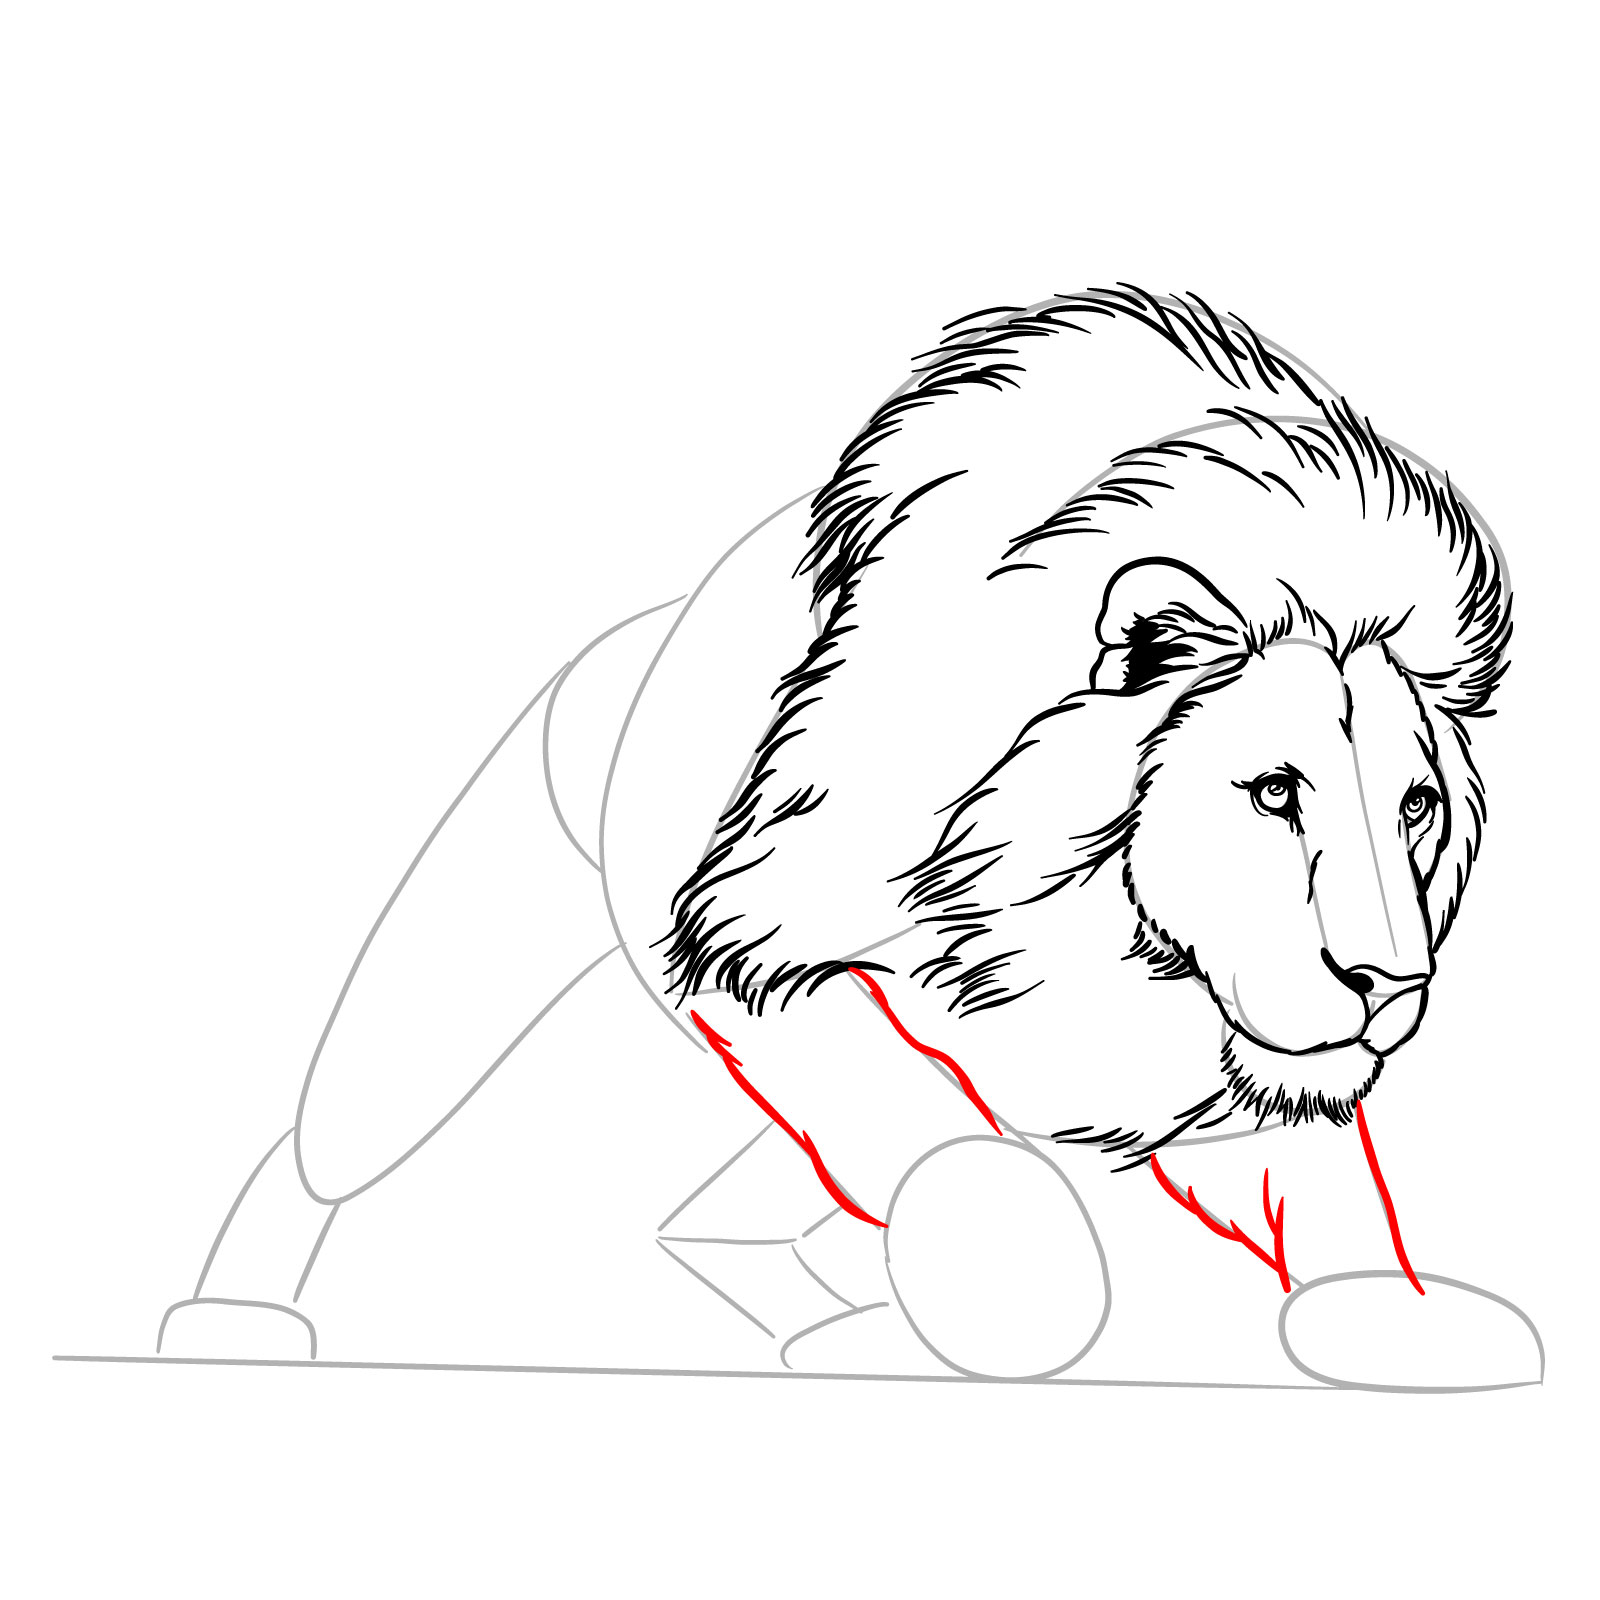 Hunting lion drawing - Step 12: Sketching the front legs to the pads